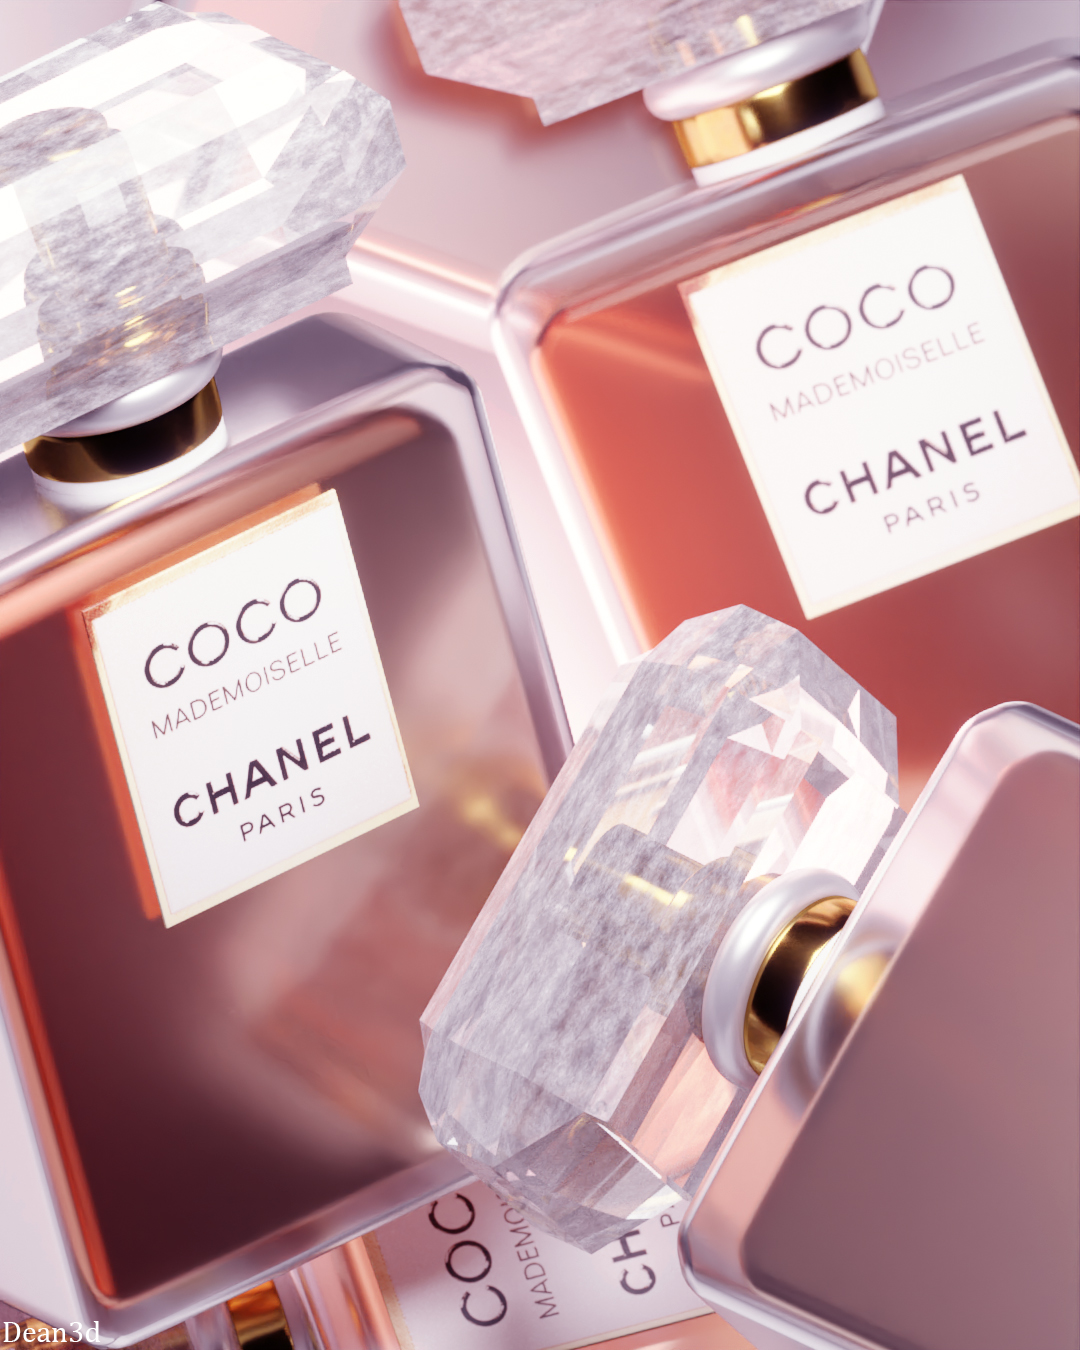 coco chanel perfume mademoiselle by Dean3D on DeviantArt